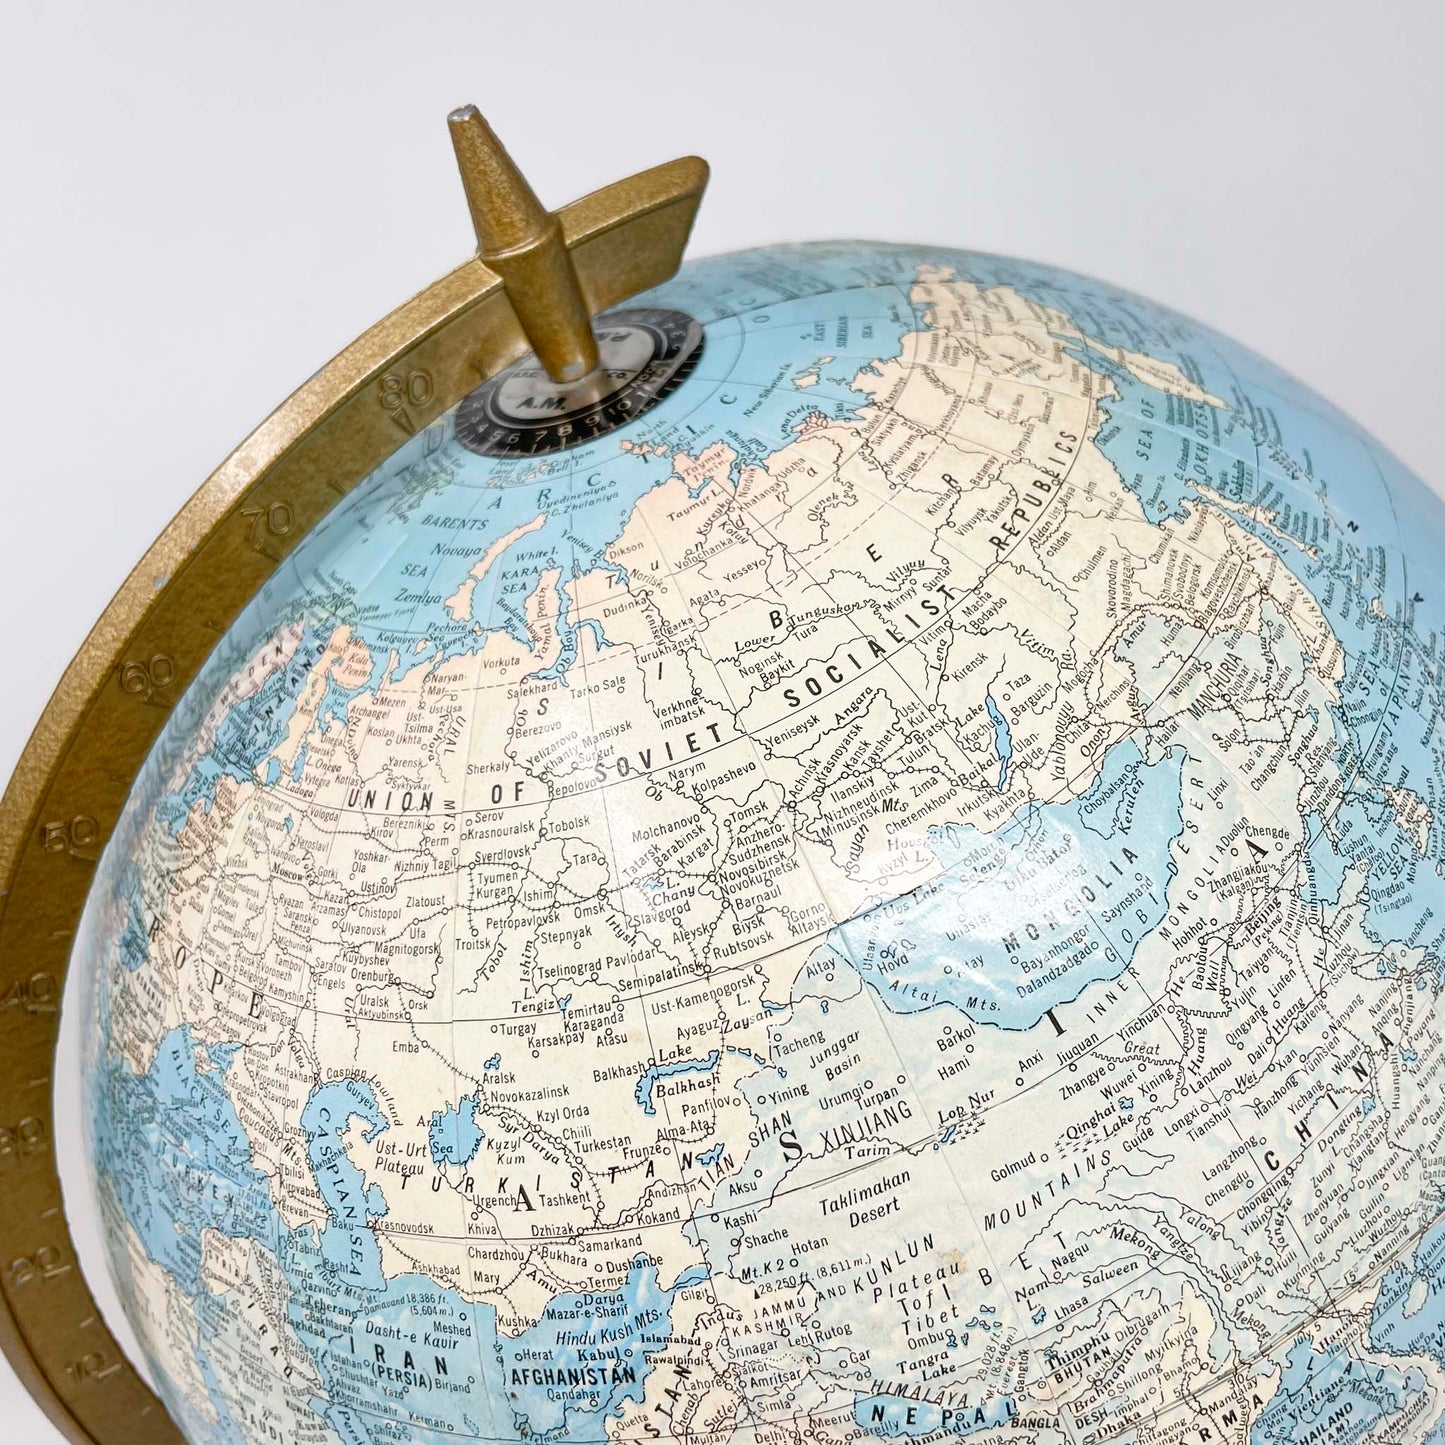 Vintage The World Book Globe with Wood Base